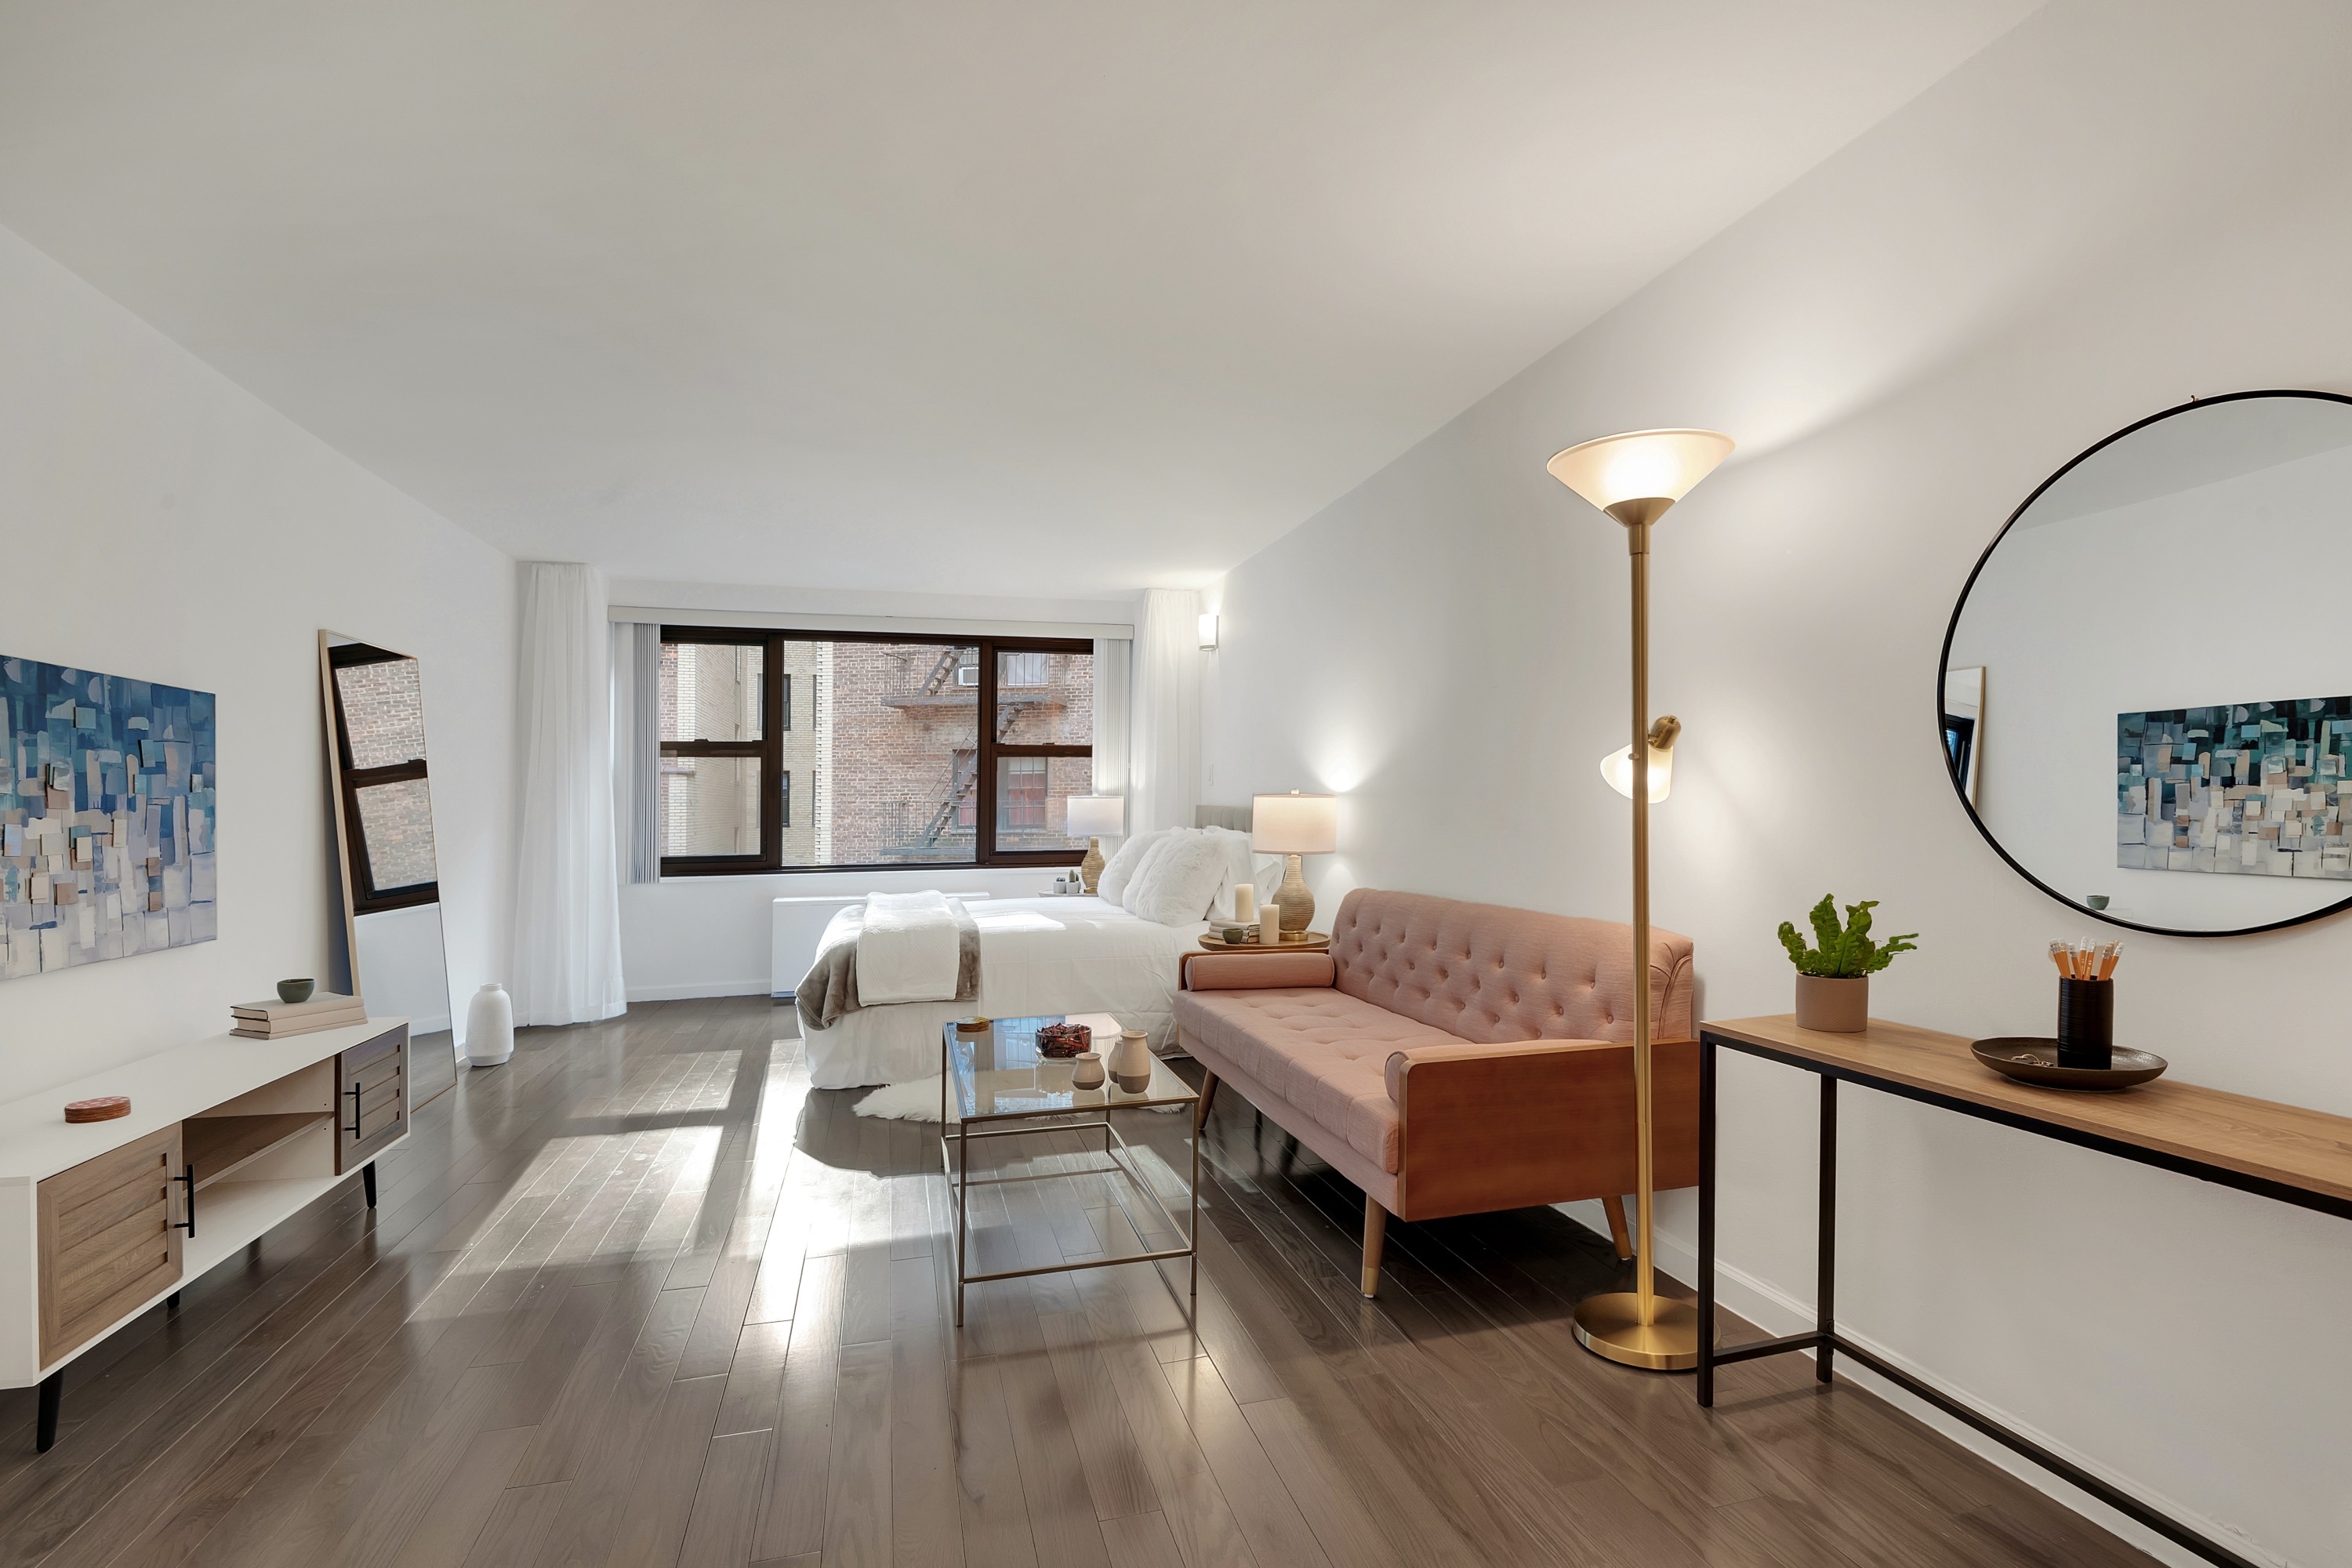 Co-op Properties for Sale at The Hamilton, 305 E 40TH ST, 10V Murray Hill, New York, New York 10017